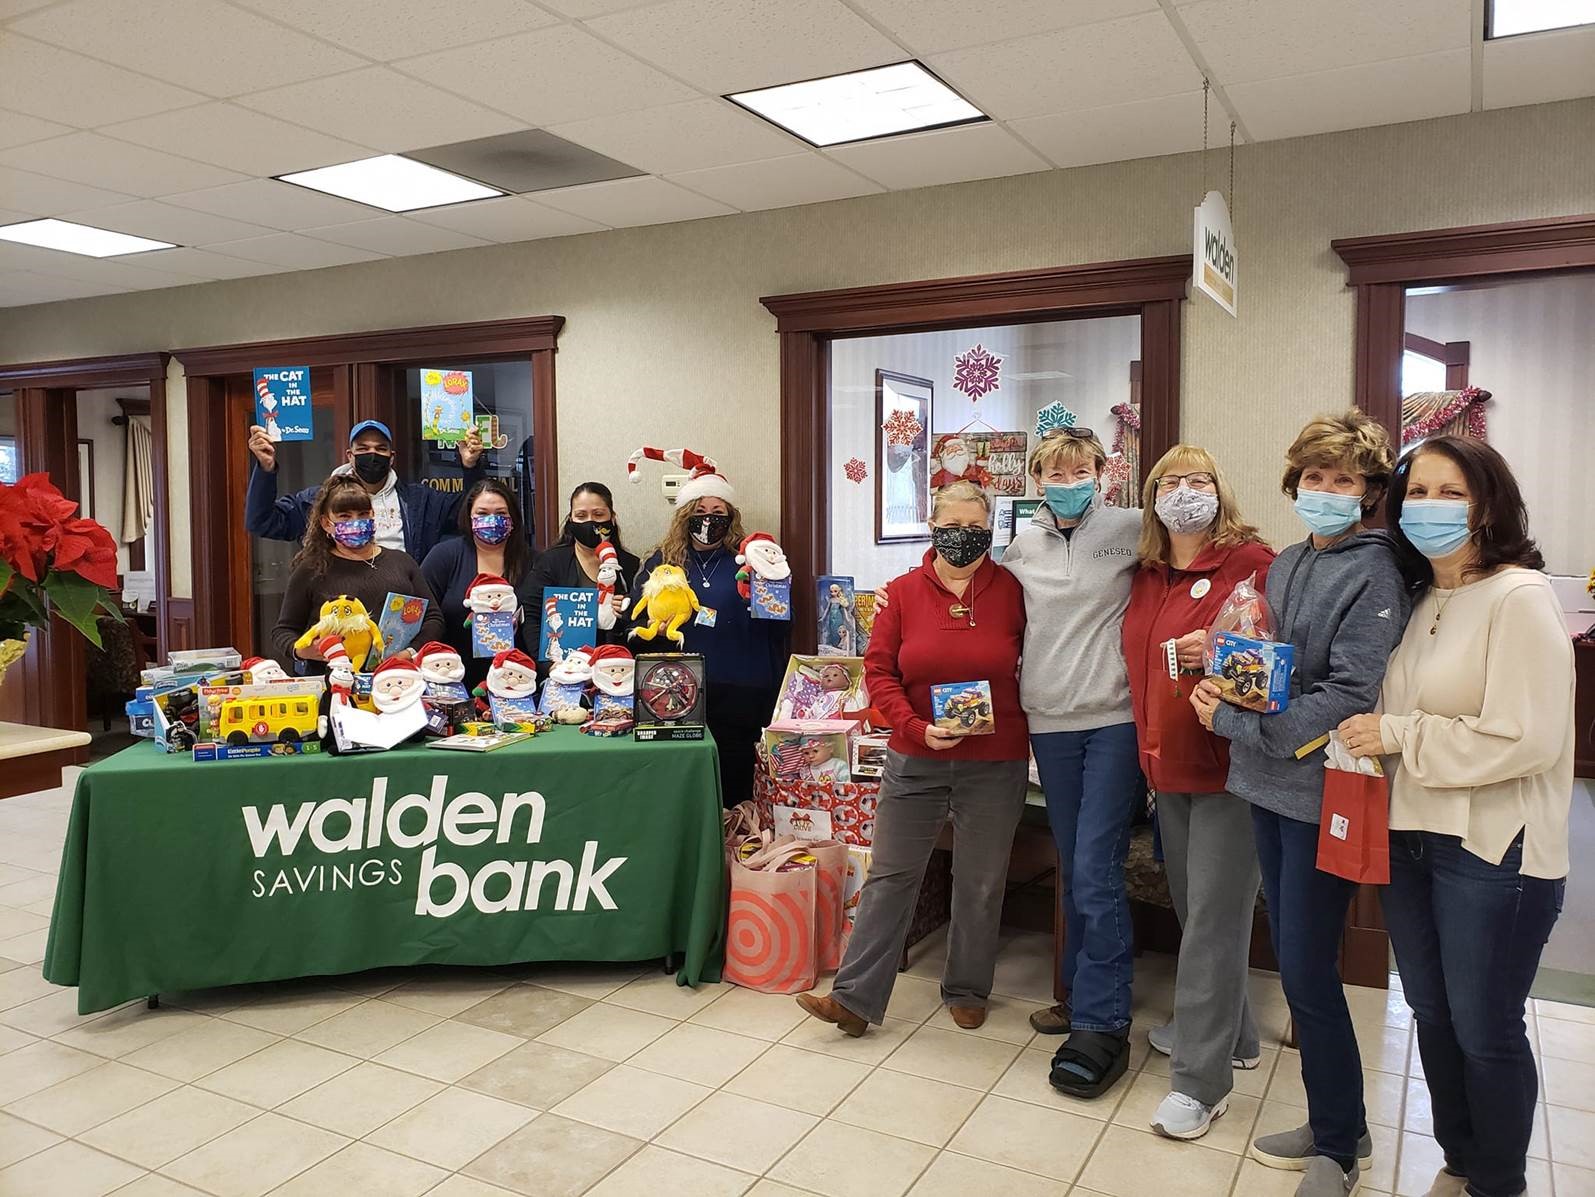  WALDEN SAVINGS BANK’S ANNUAL “22 DAYS OF GIVING” CAMPAIGN RAISES OVER $24,000 FOR LOCAL CAUSES